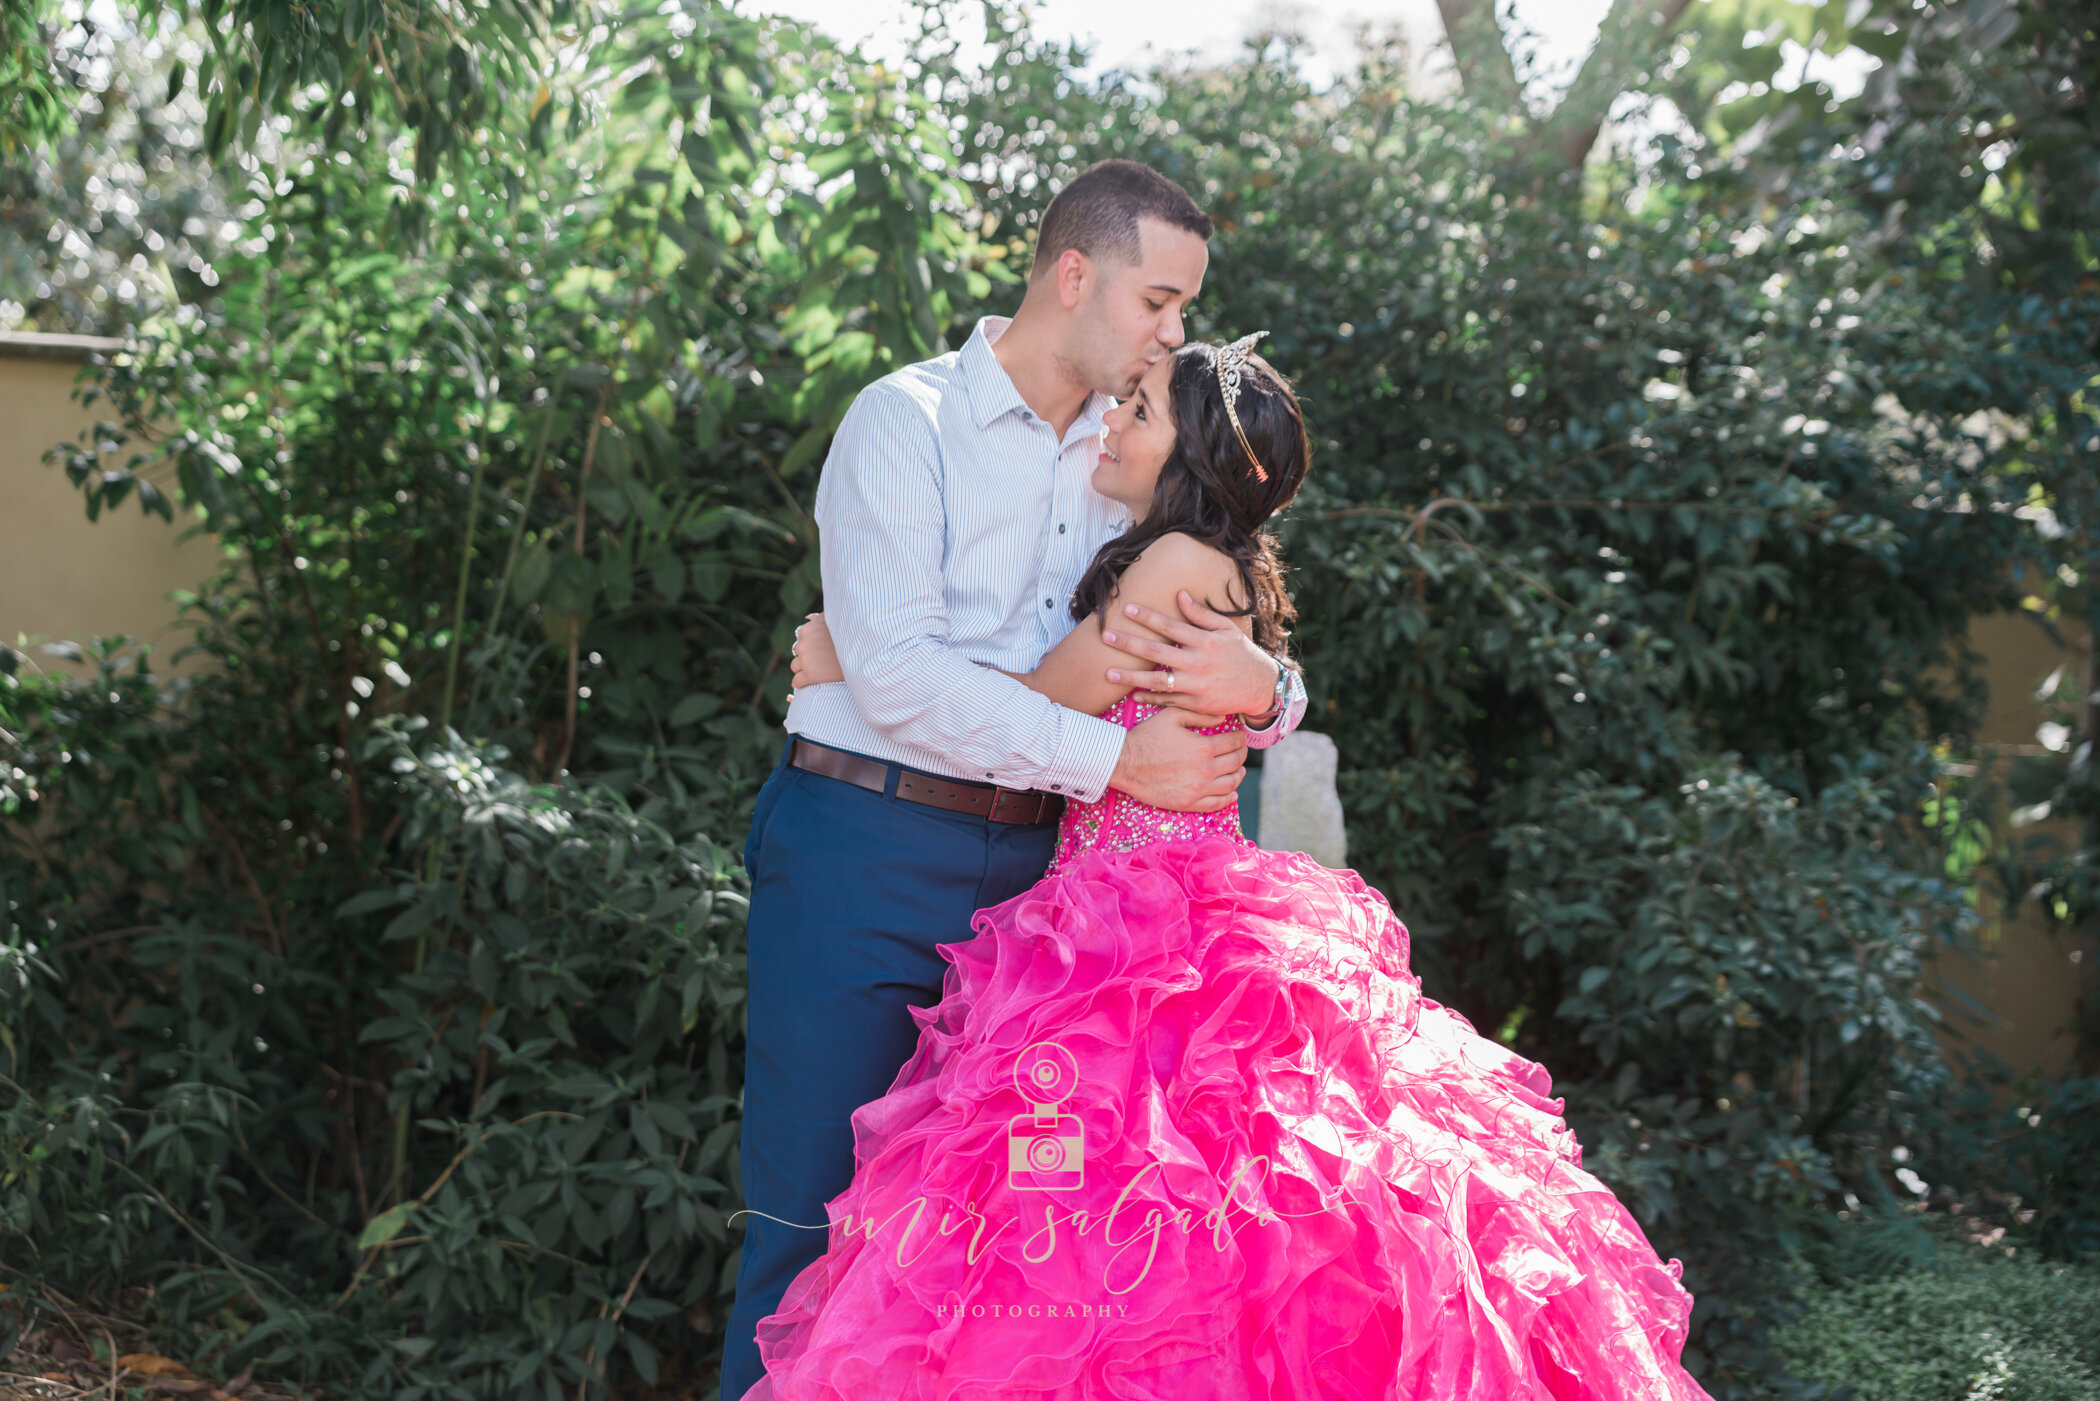 family-quince-photography, dad-and-daughter-quinceanera-photos, quinceanera-dress, sweet-15